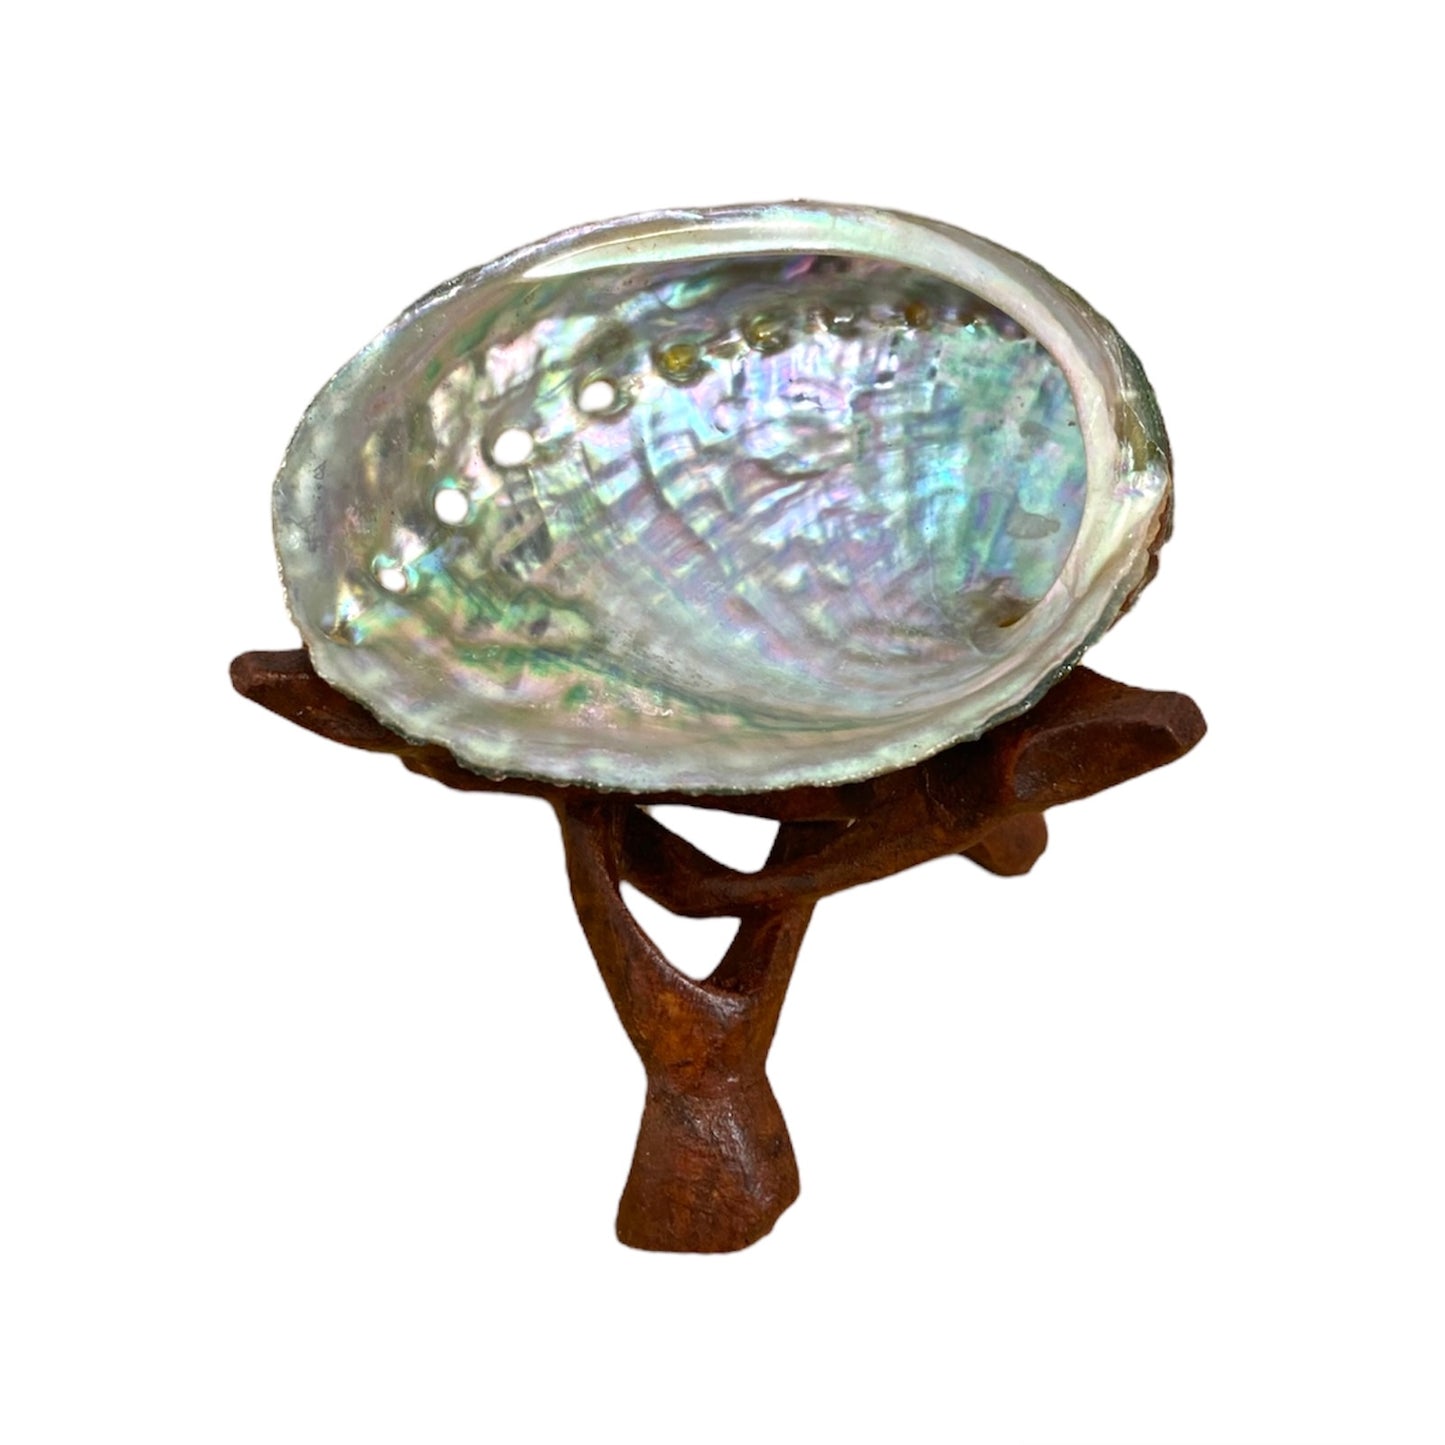 NessaStores 300 Abalone Shells 2.5 to 3.5 Inches | Beautiful All Natural Smudge Bowl - Perfect for Smudge Sticks, Incense Sticks and a Sage Smudge Kit. #JC-020